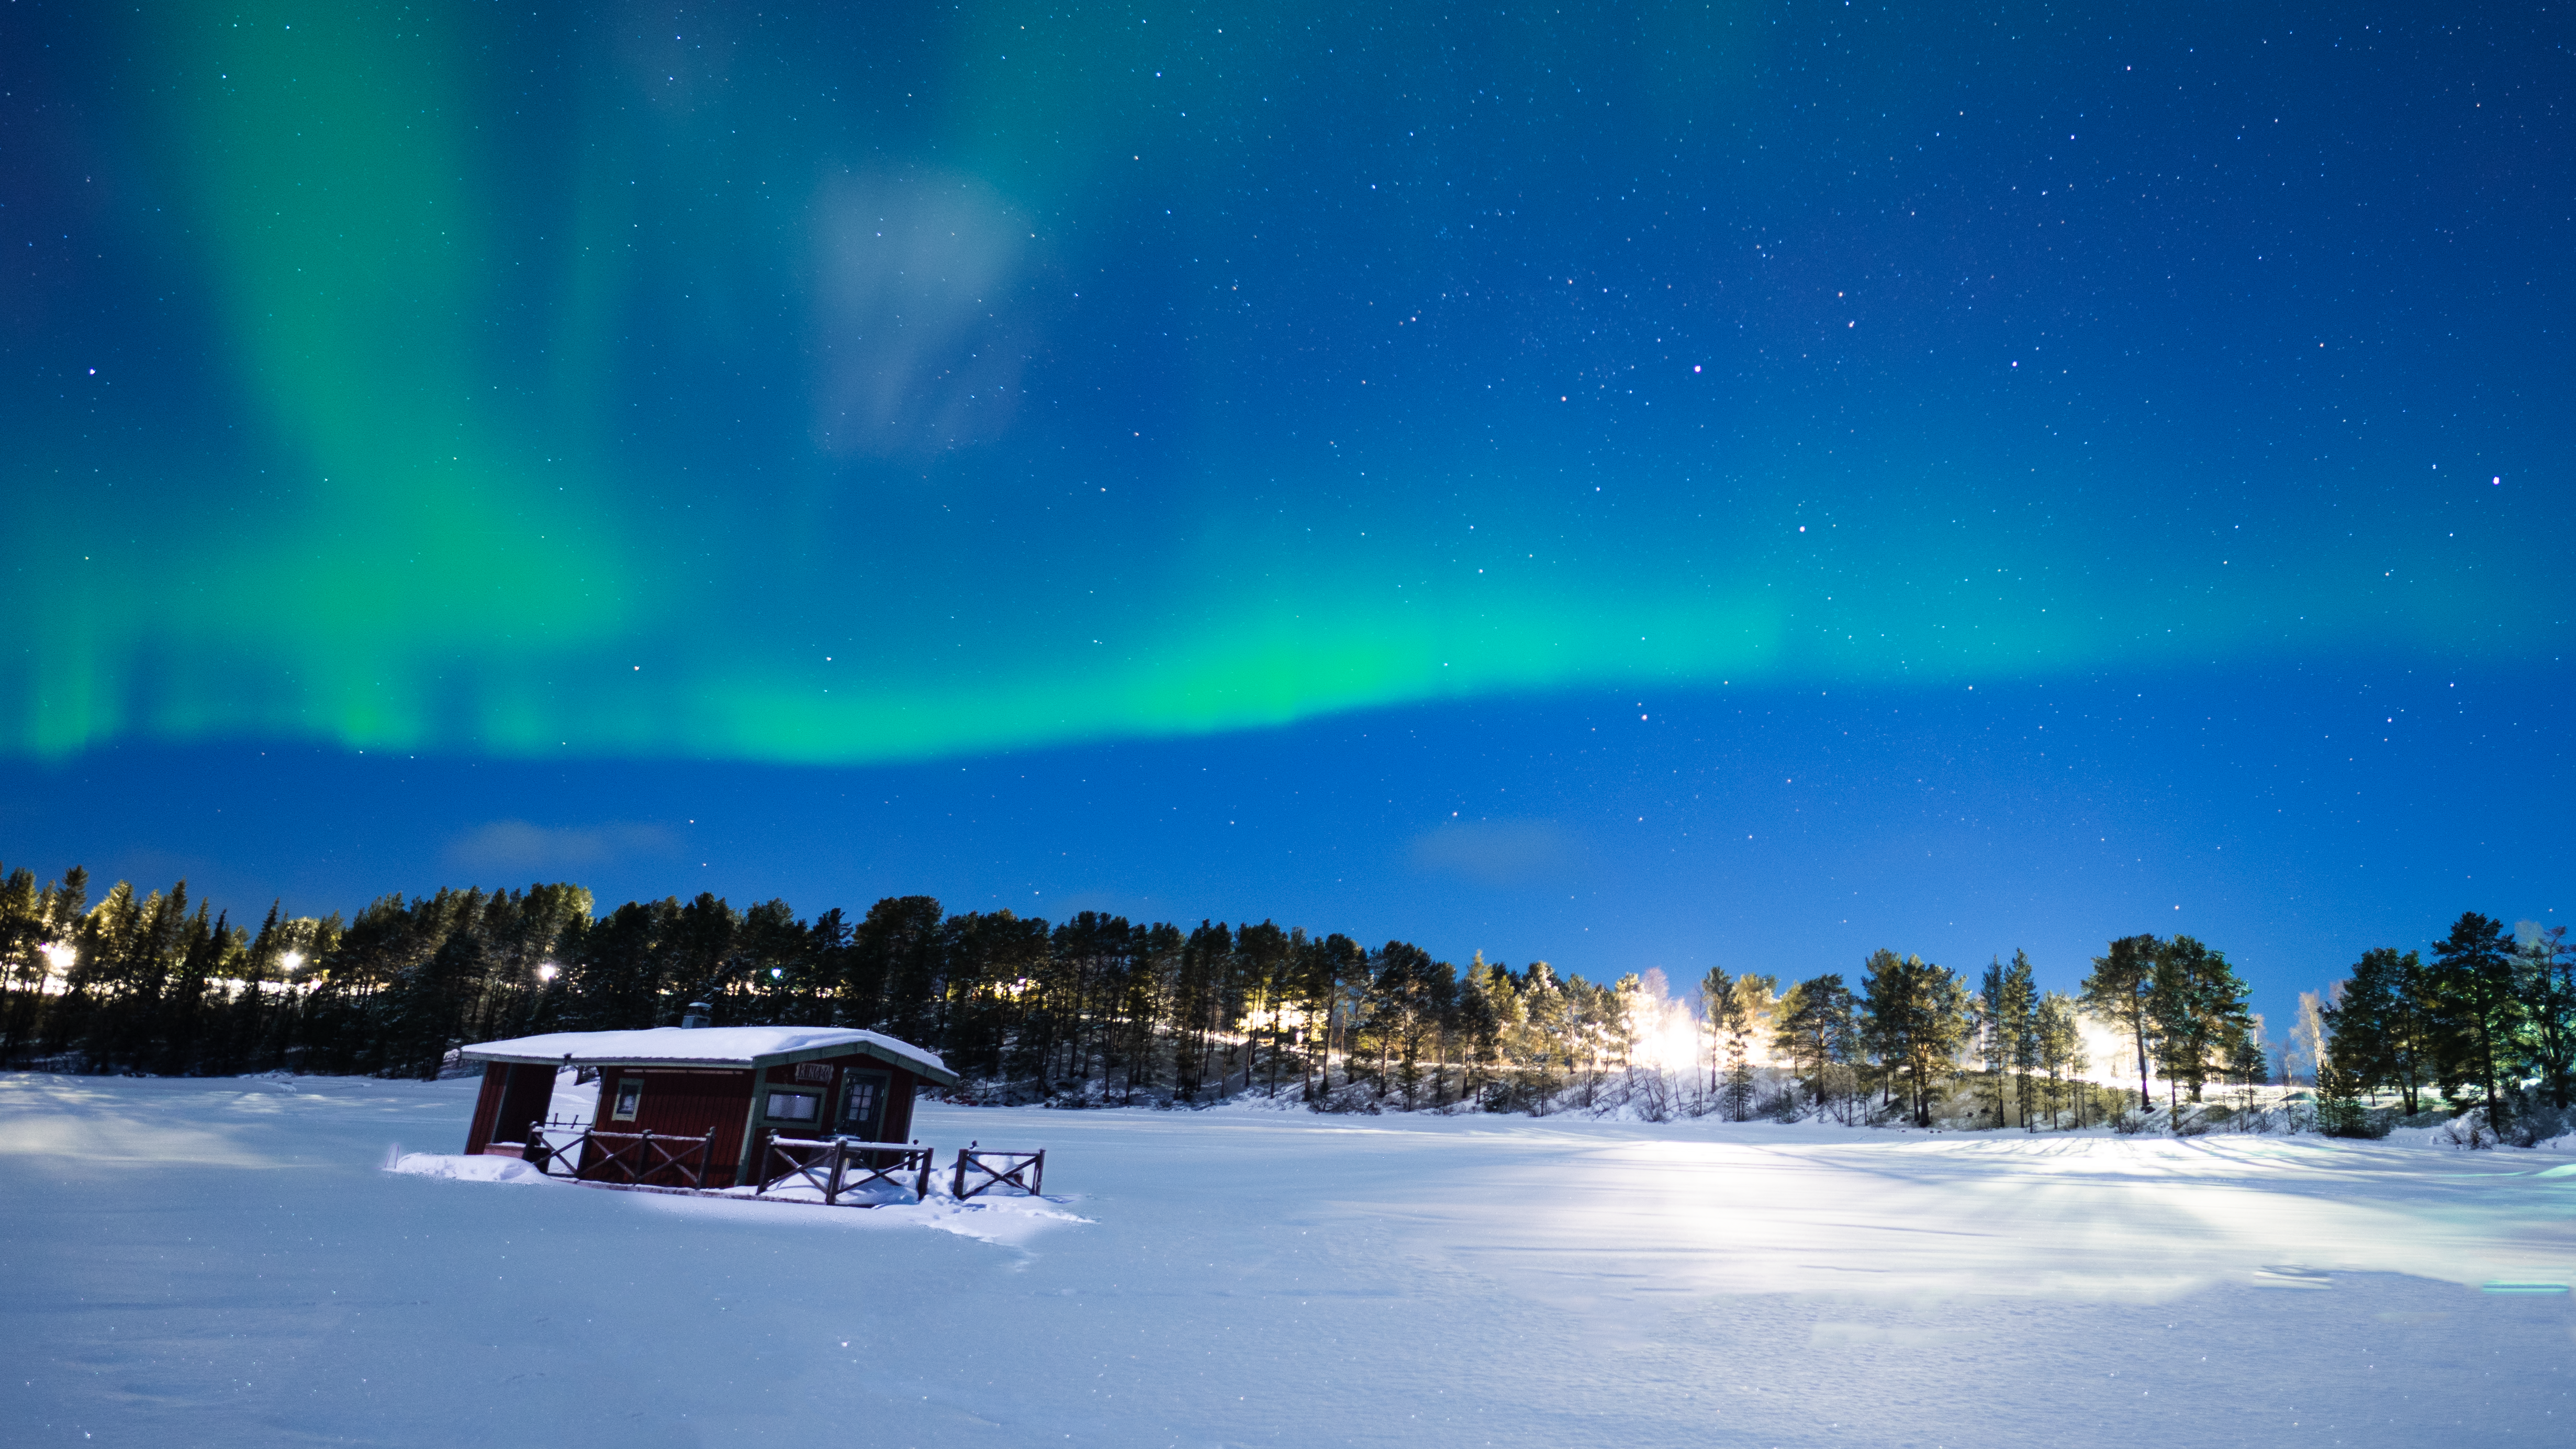 Northern Lights with snow on the ground and red hut in foreground